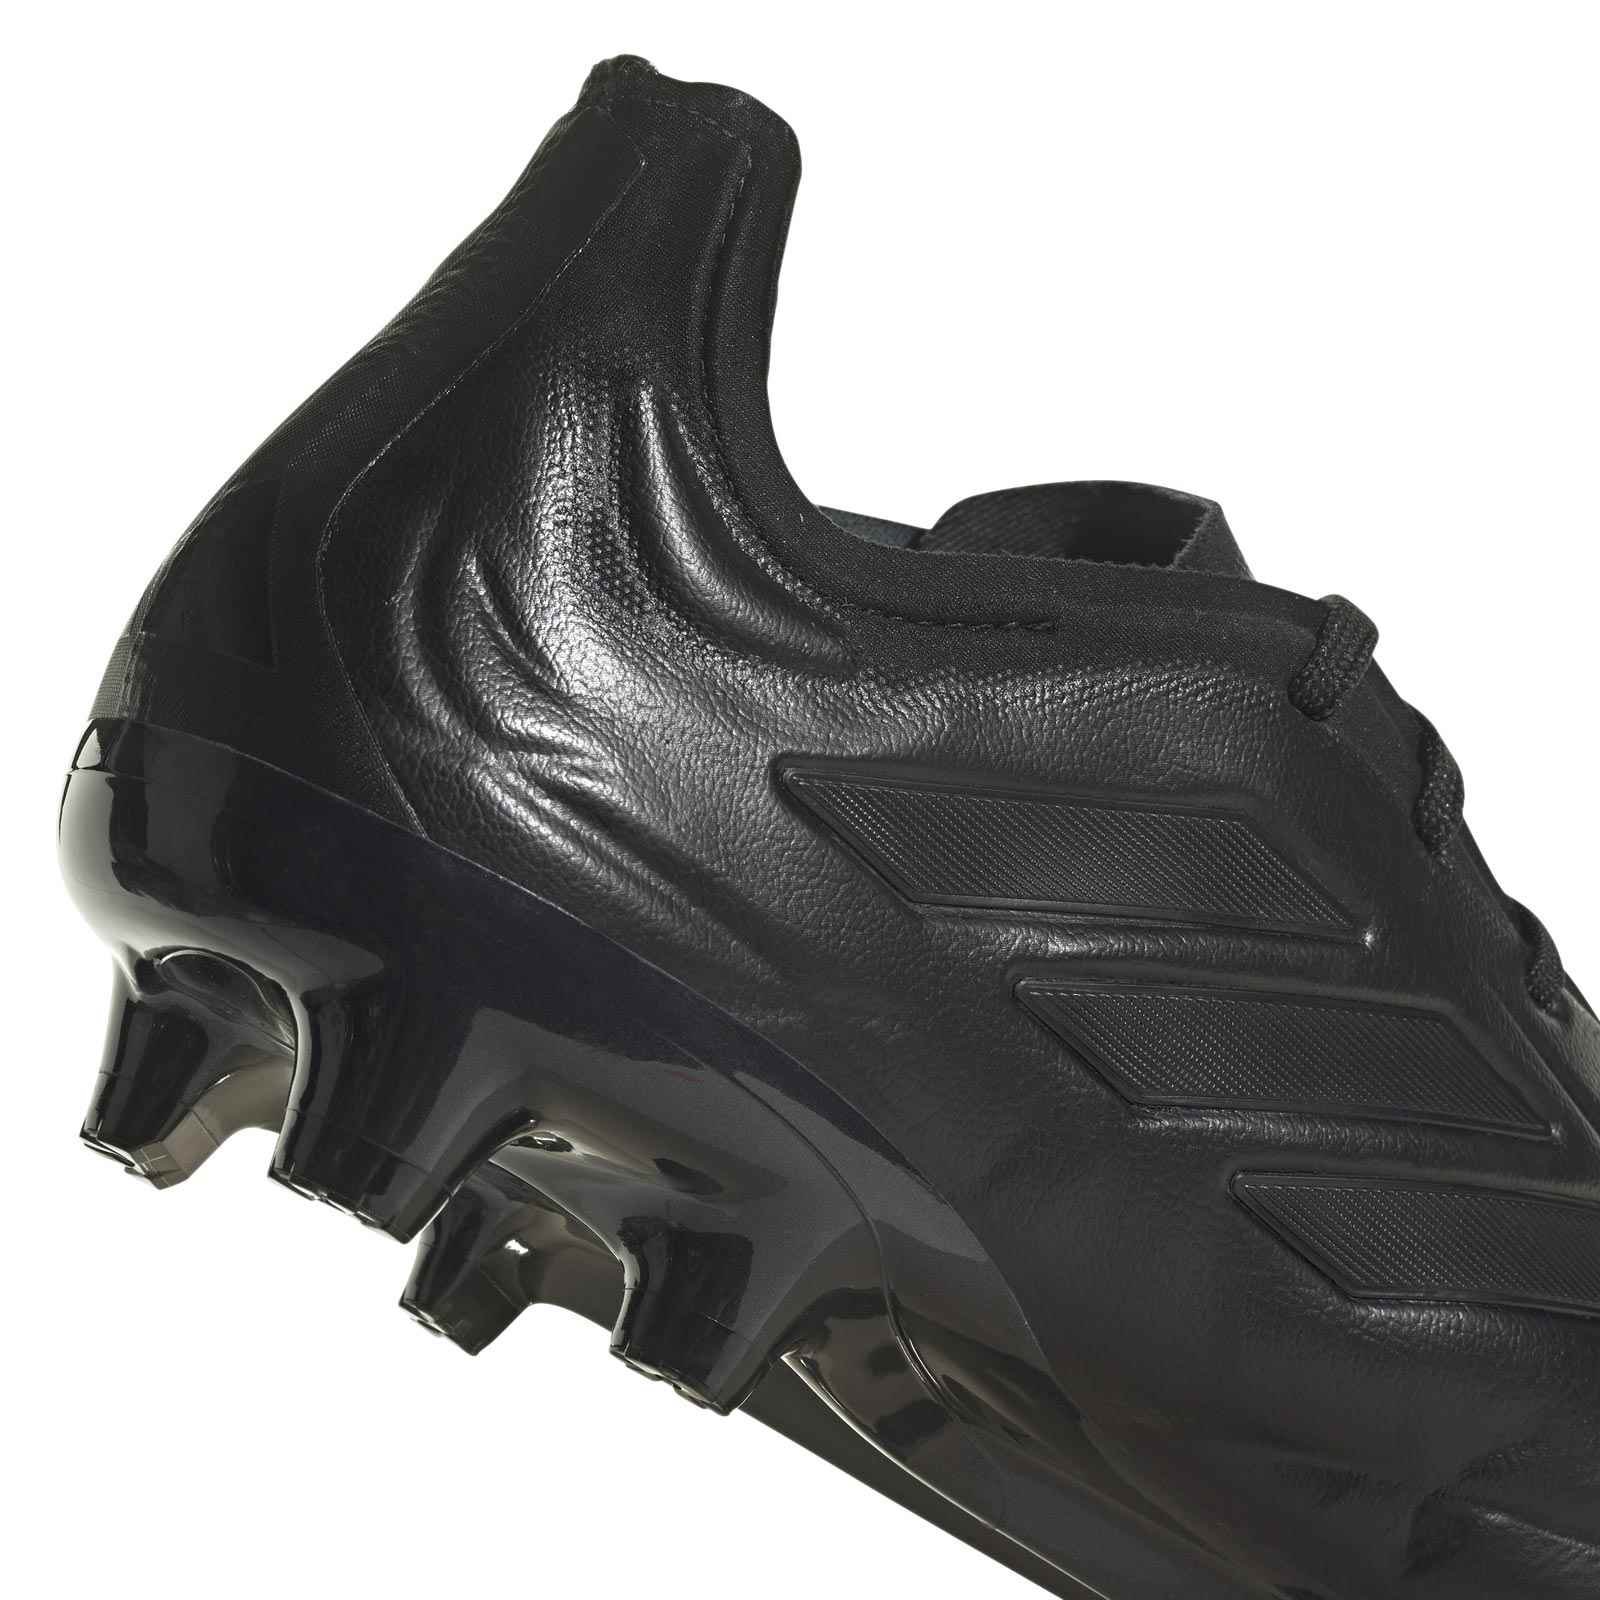 Adidas Copa Pure.1 Firm Ground Boots